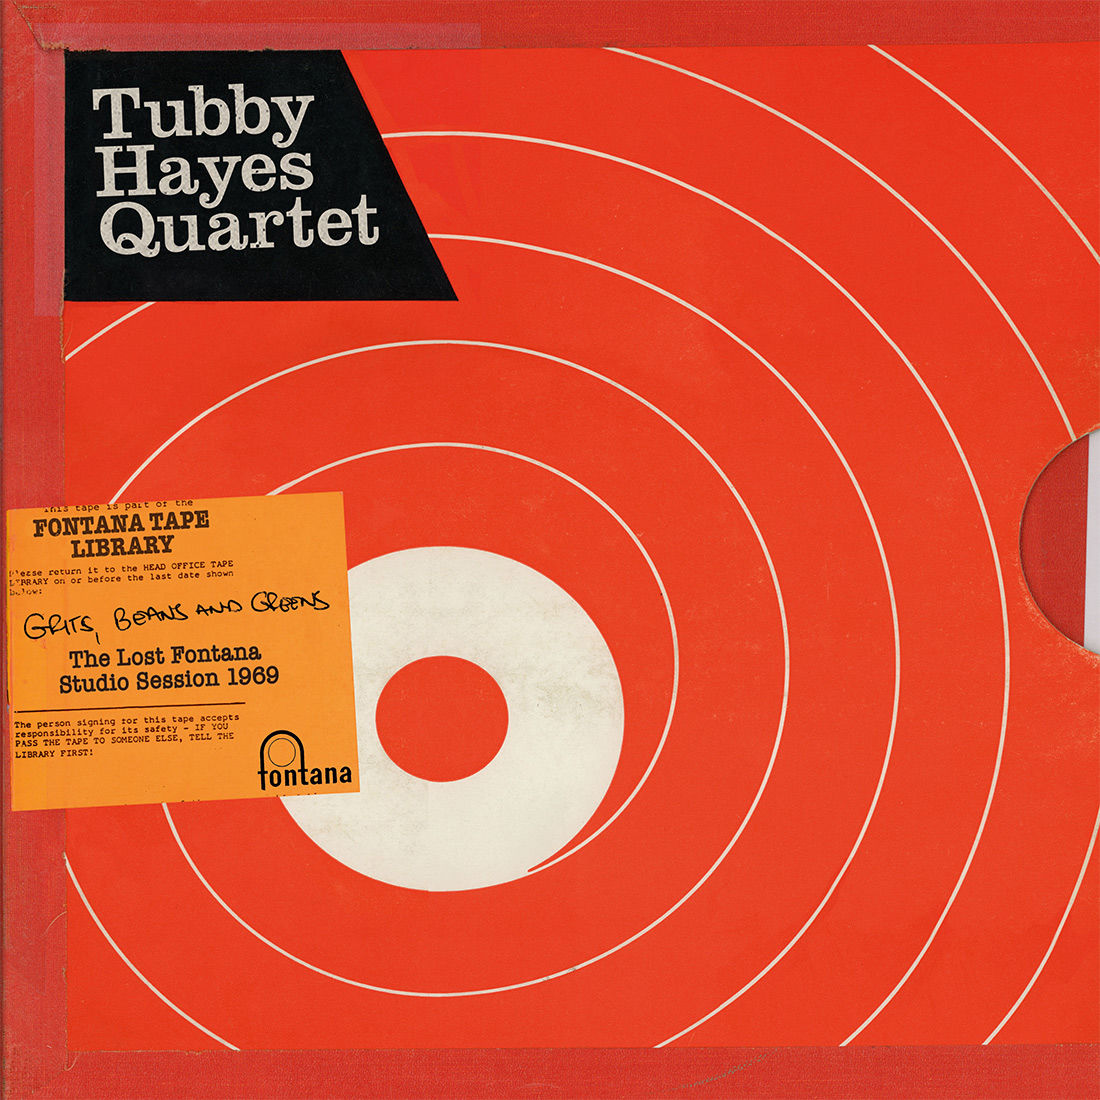 The Tubby Hayes Quartet - Grits, Beans And Greens - The Lost Fontana Studio Sessions 1969: CD